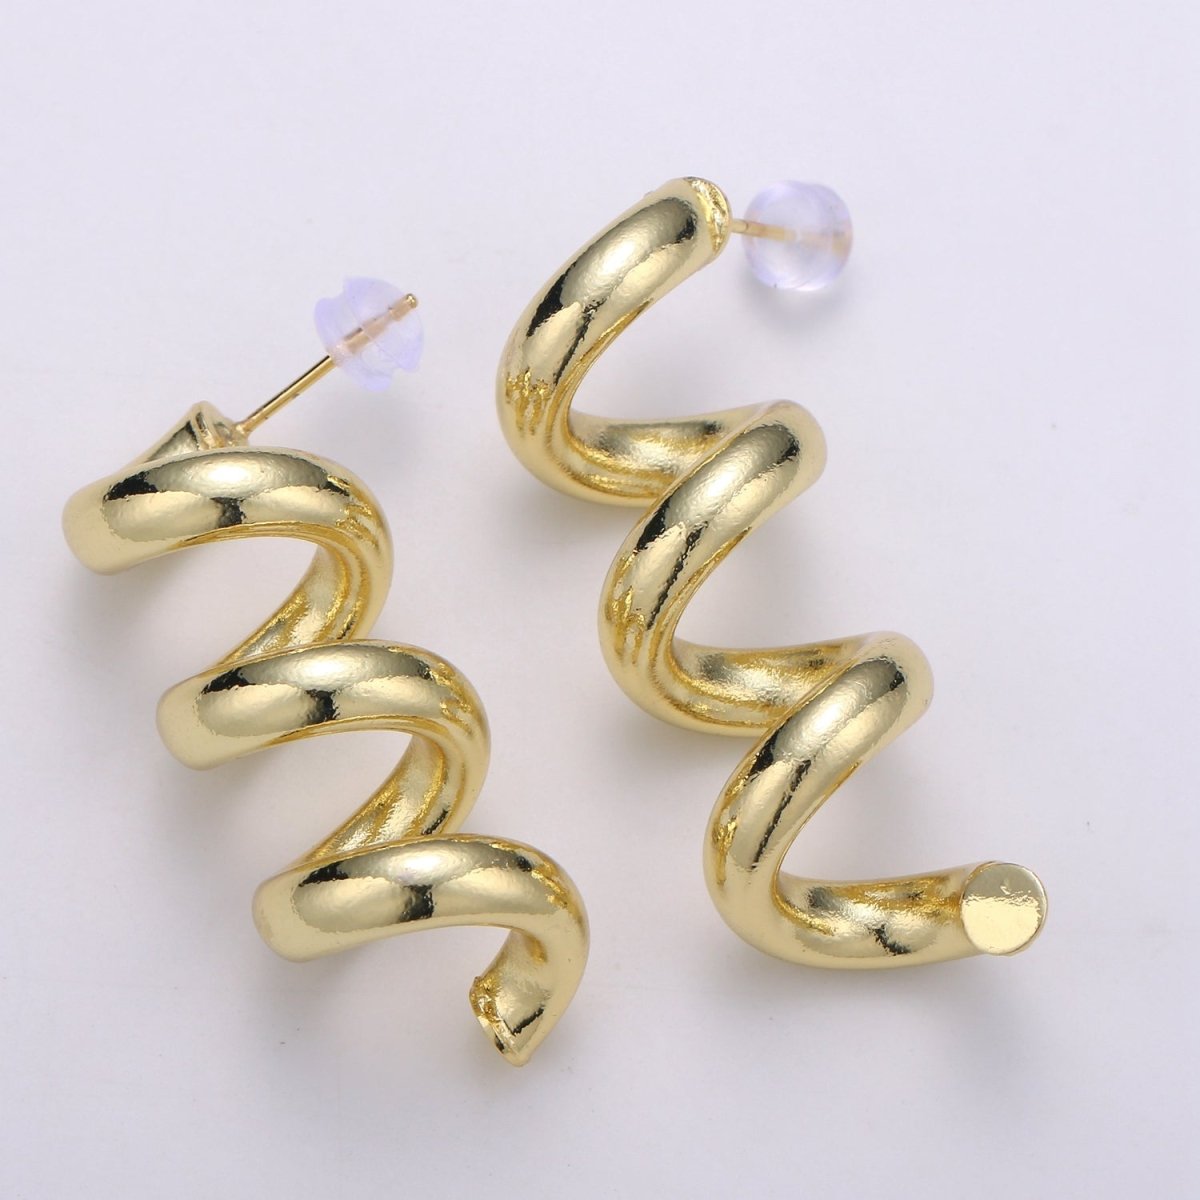 Gold Spiral Earrings, Gold Stud Earrings, Gold Corkscrew Earrings, Gold Chunky Earrings Bold Statement Jewelry Q-340 - DLUXCA